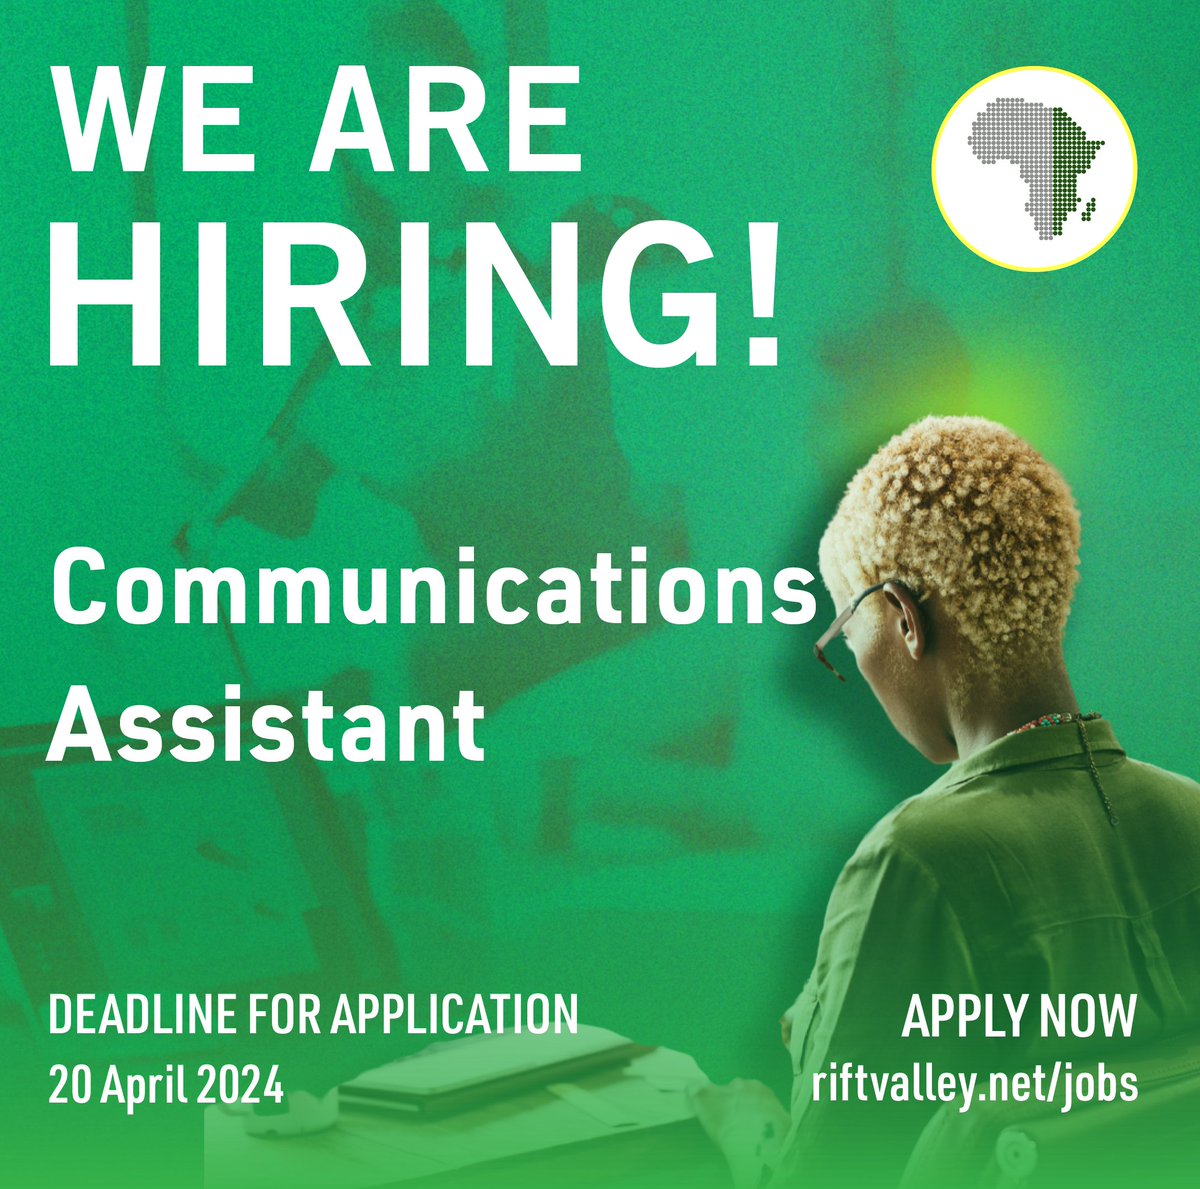 RVI is looking for a dynamic entry-level Communications Assistant to manage our website, social media, create engaging content, provide IT and design support. Based in Nairobi, you'll play a key role in our communication strategy. Learn more and apply: bit.ly/4cI7voS